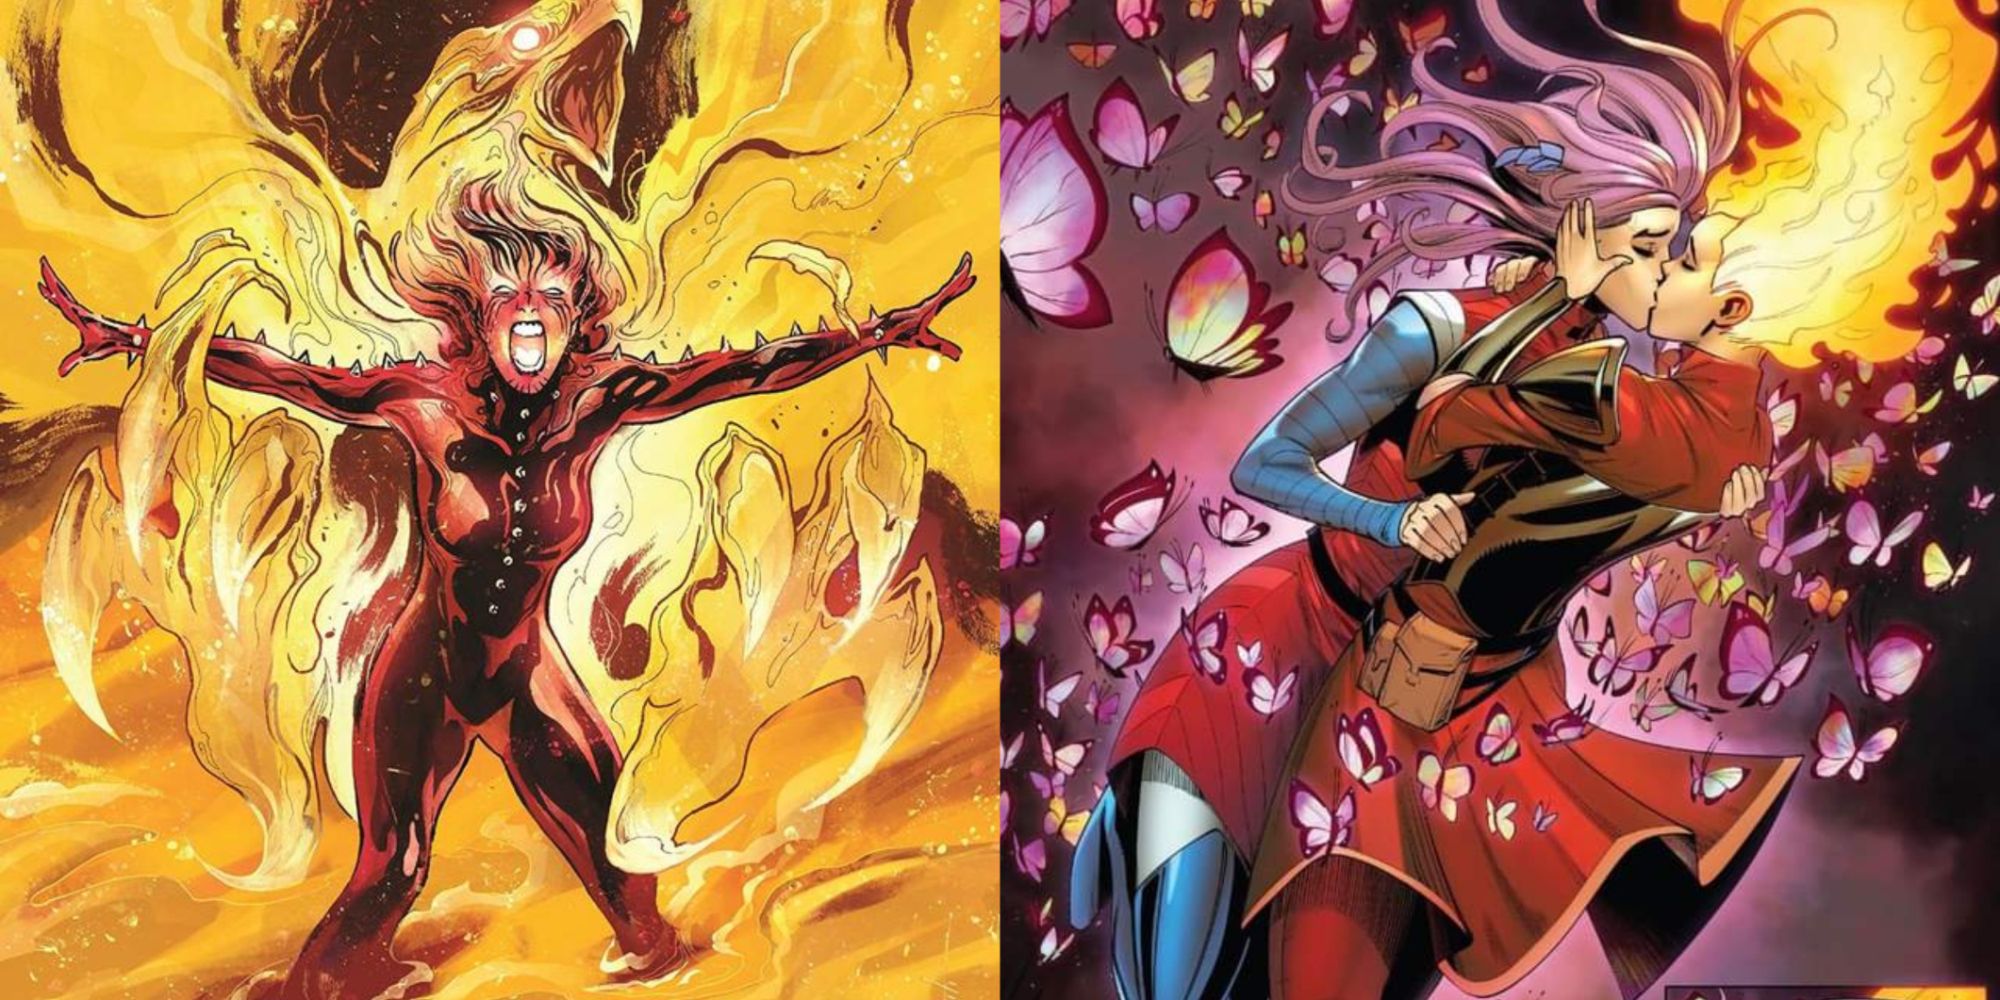 Split image of Rachel Summers using the Phoenix Force and kissing Betsy Braddock in Marvel Comics.